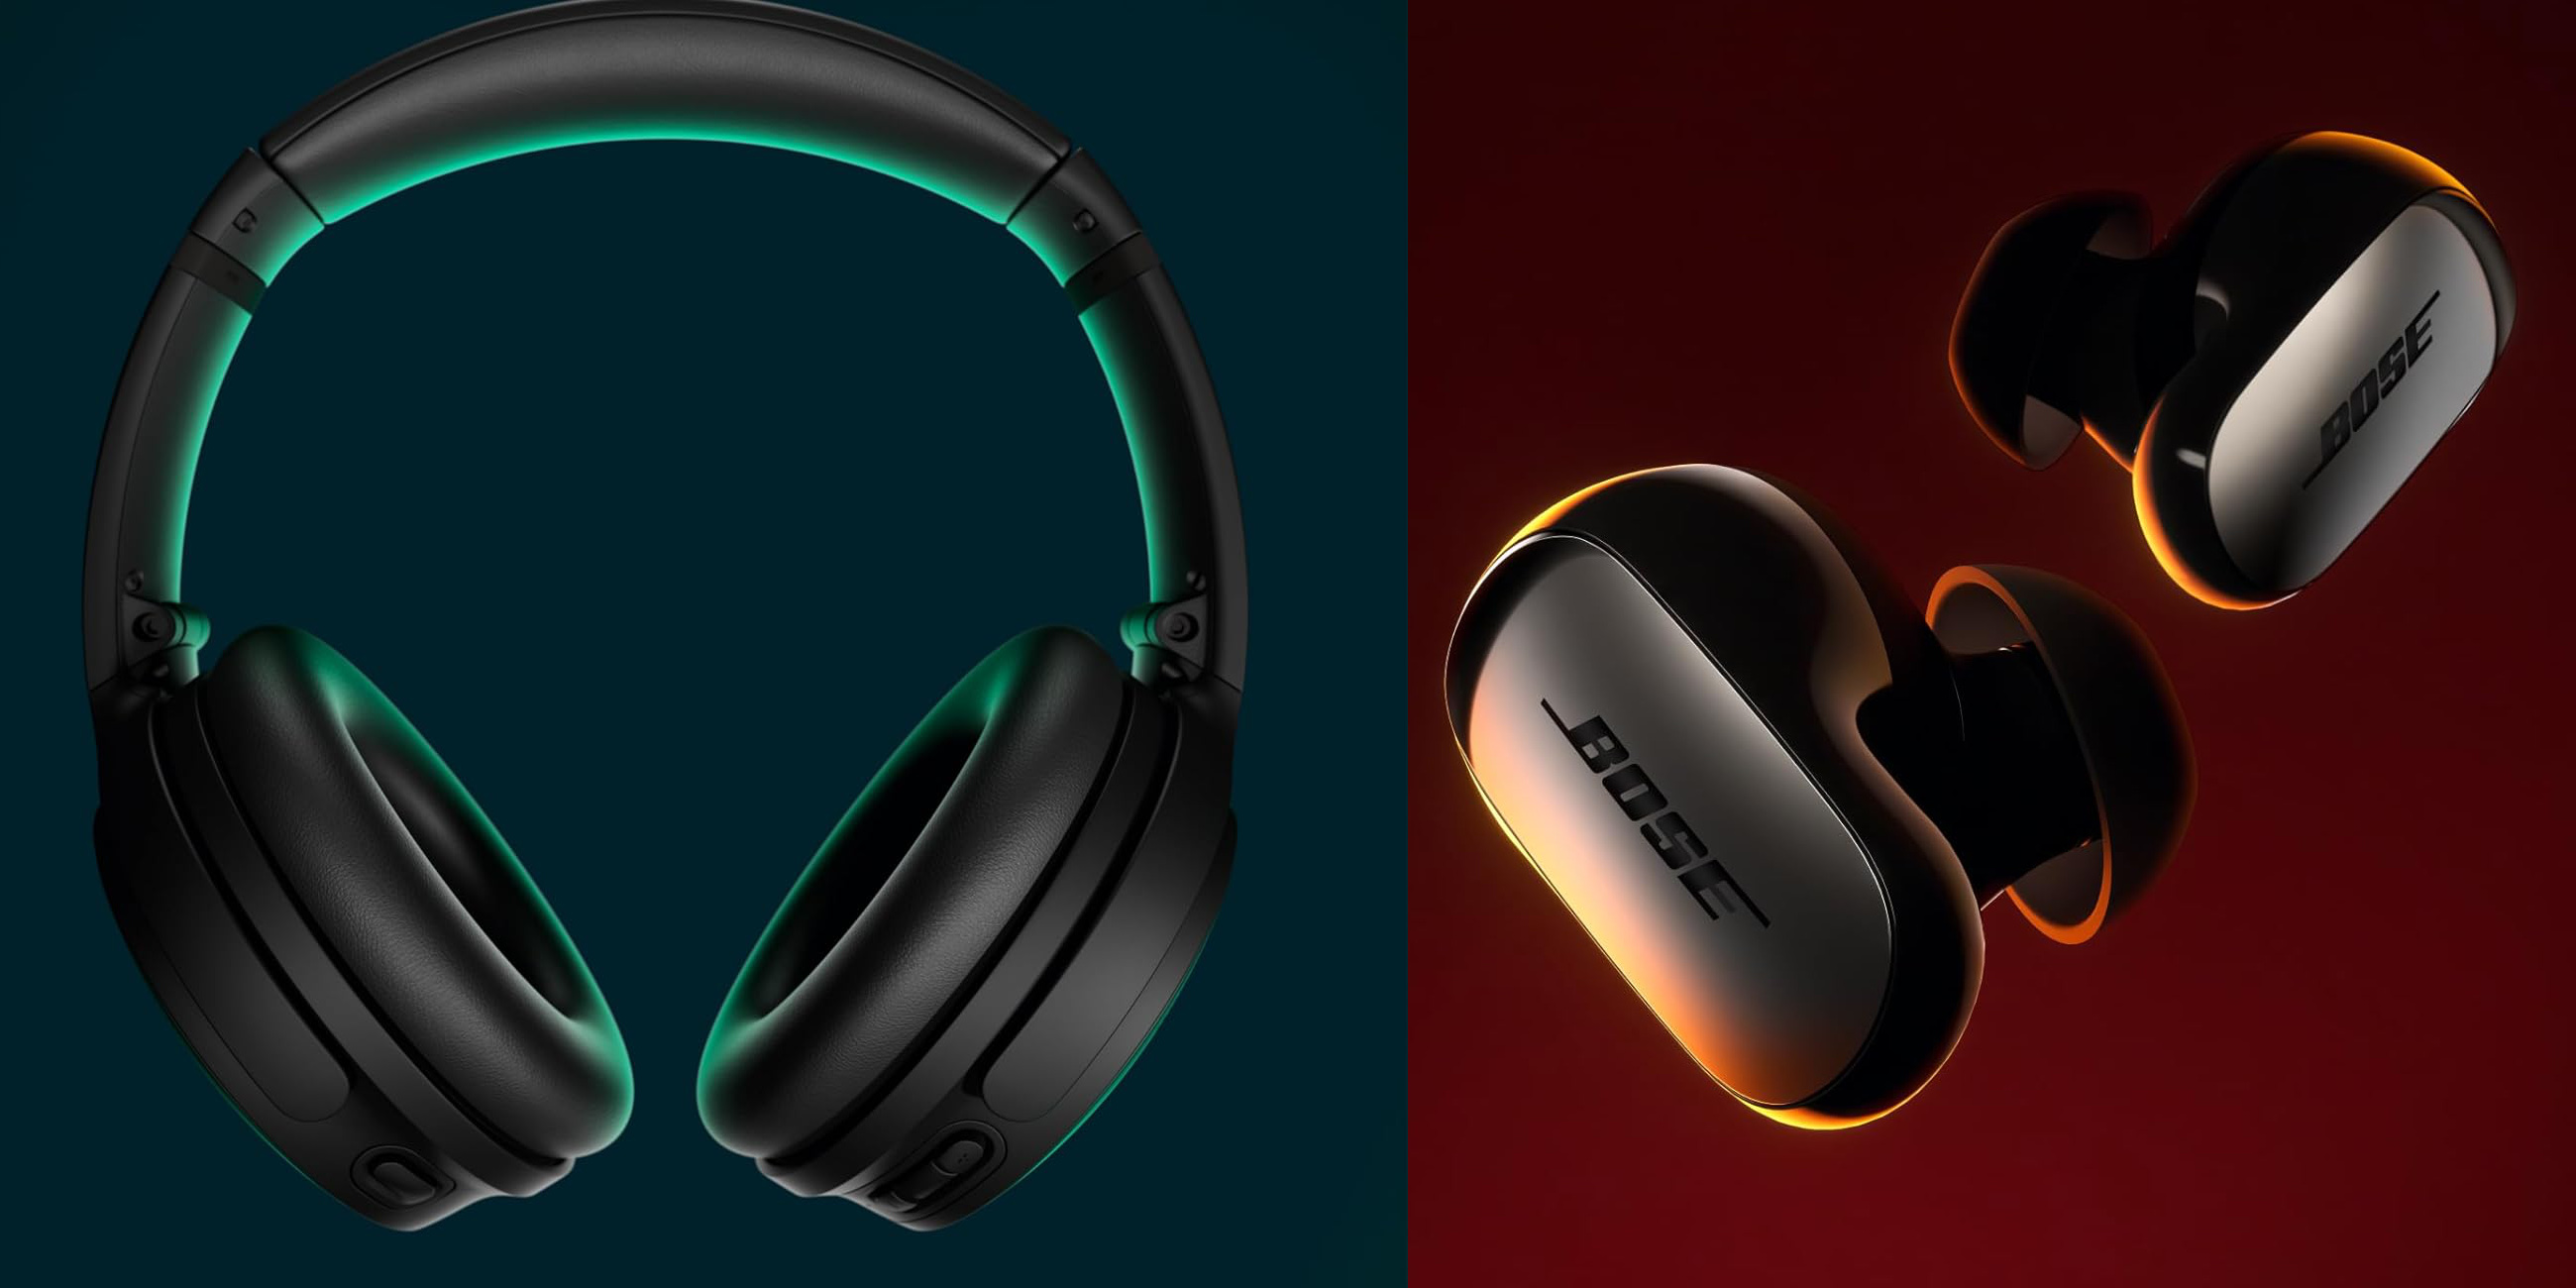 Bose Memorial day sale goes live with up to 100 off latest